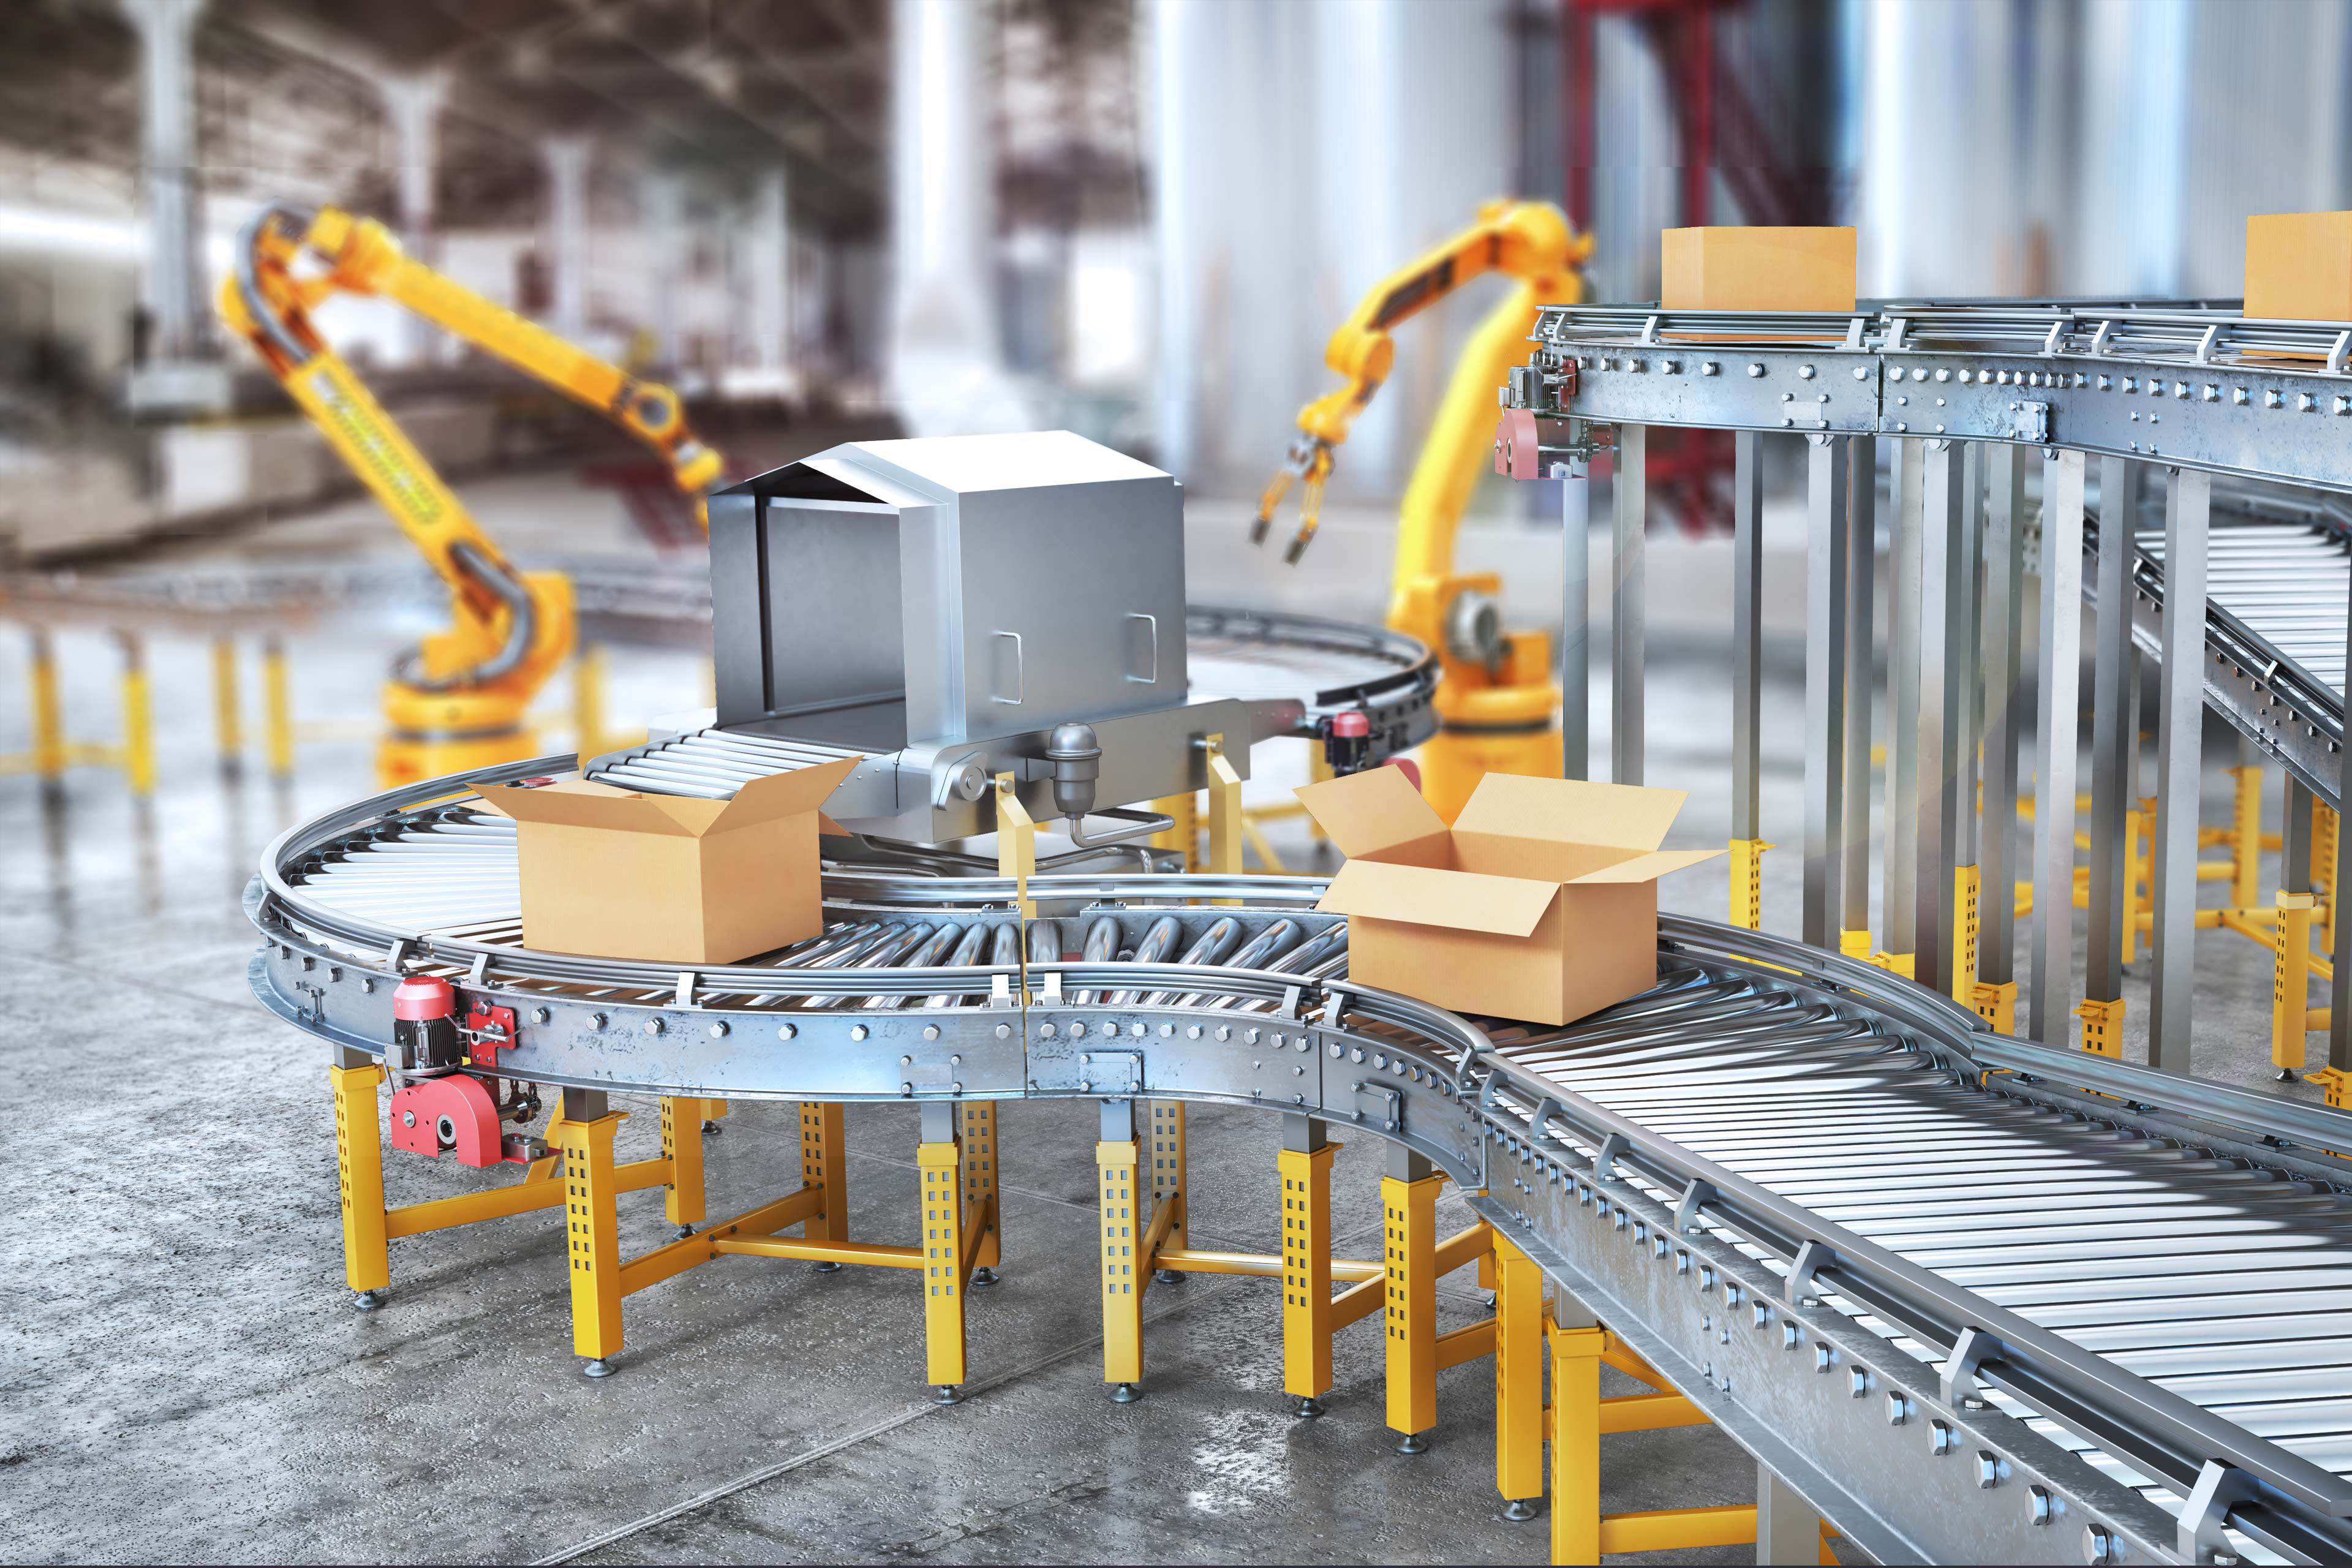 Conveyors on a blurred factory background